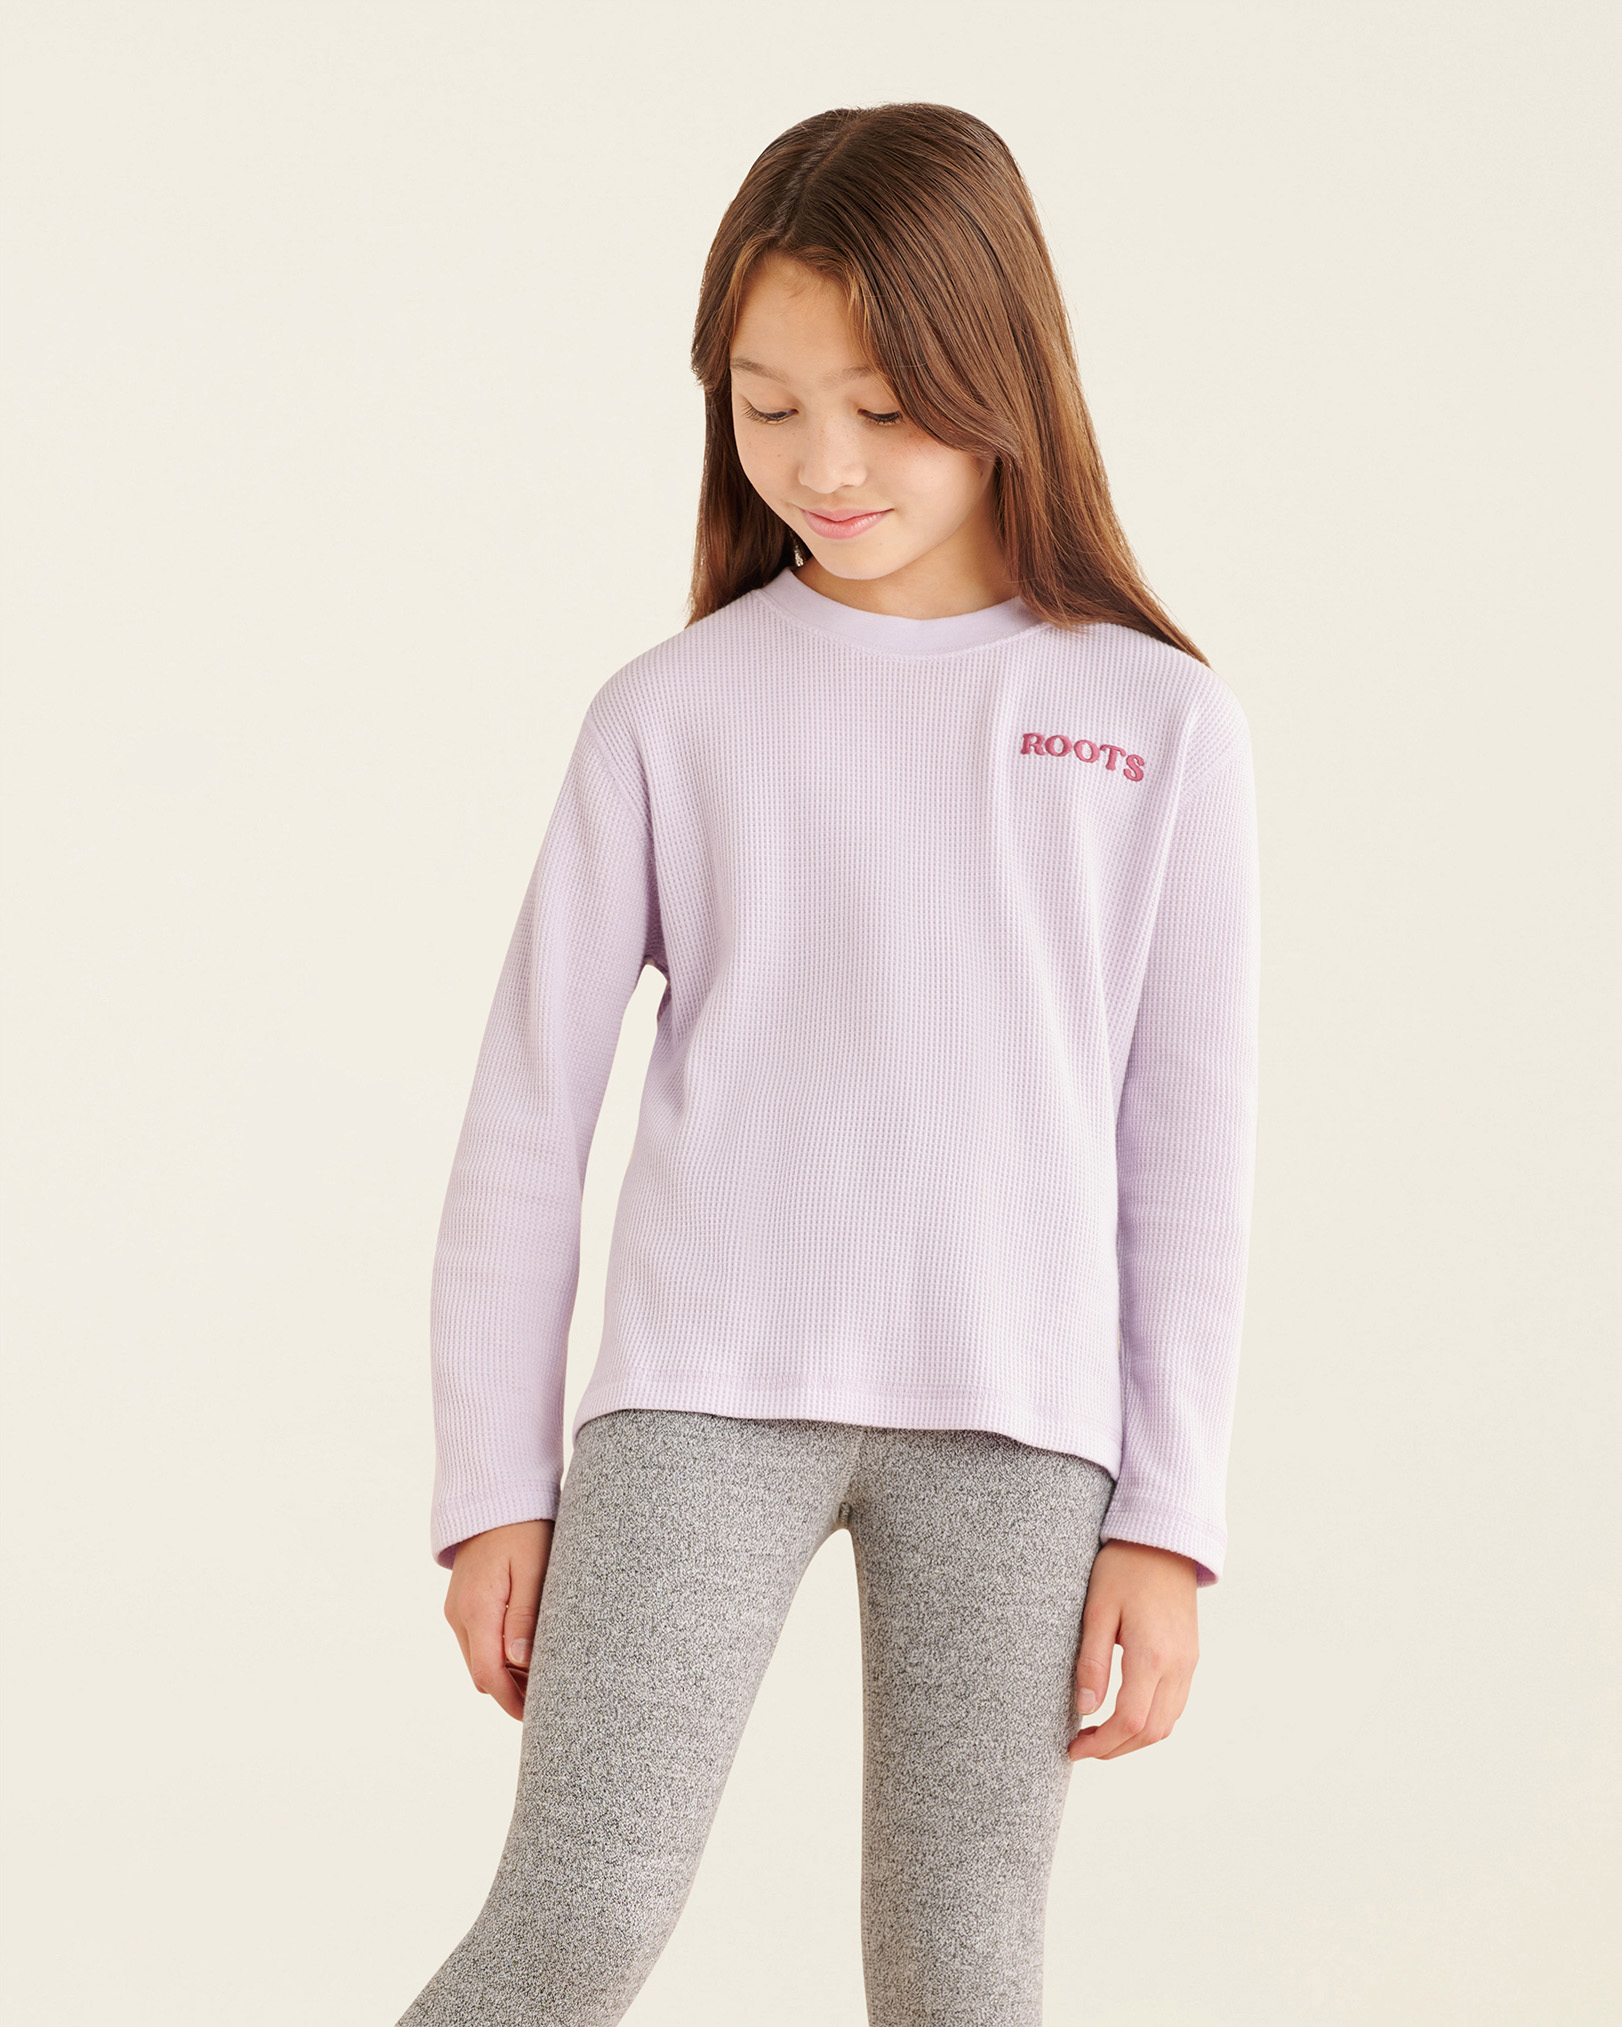 Roots Kids Waffle T-Shirt in Orchid Petal